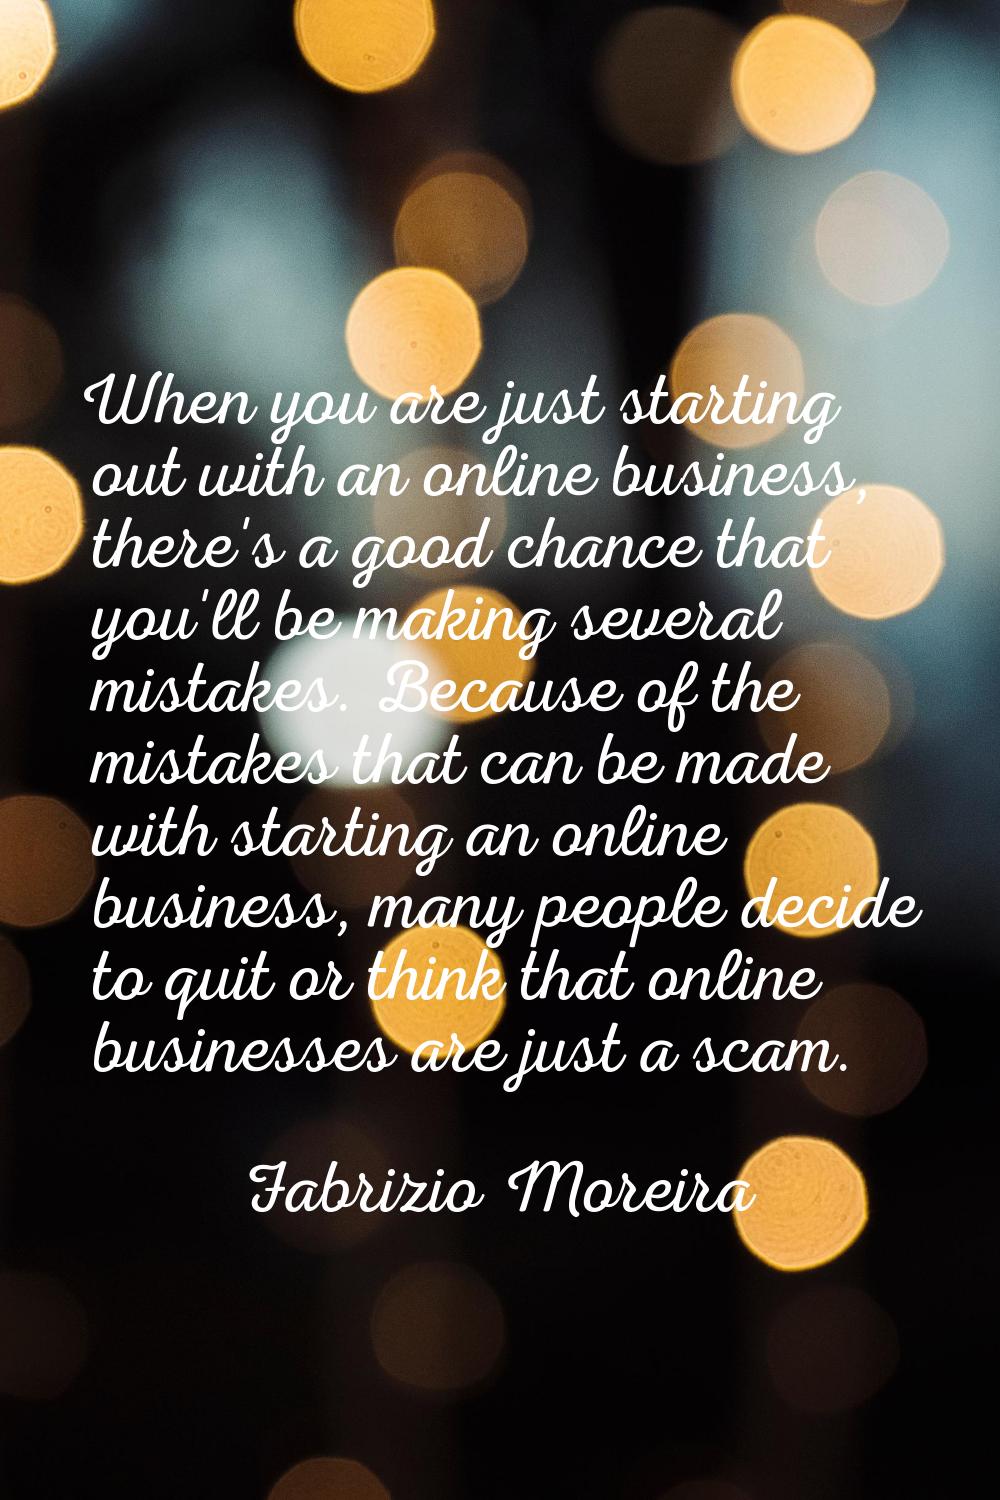 When you are just starting out with an online business, there's a good chance that you'll be making